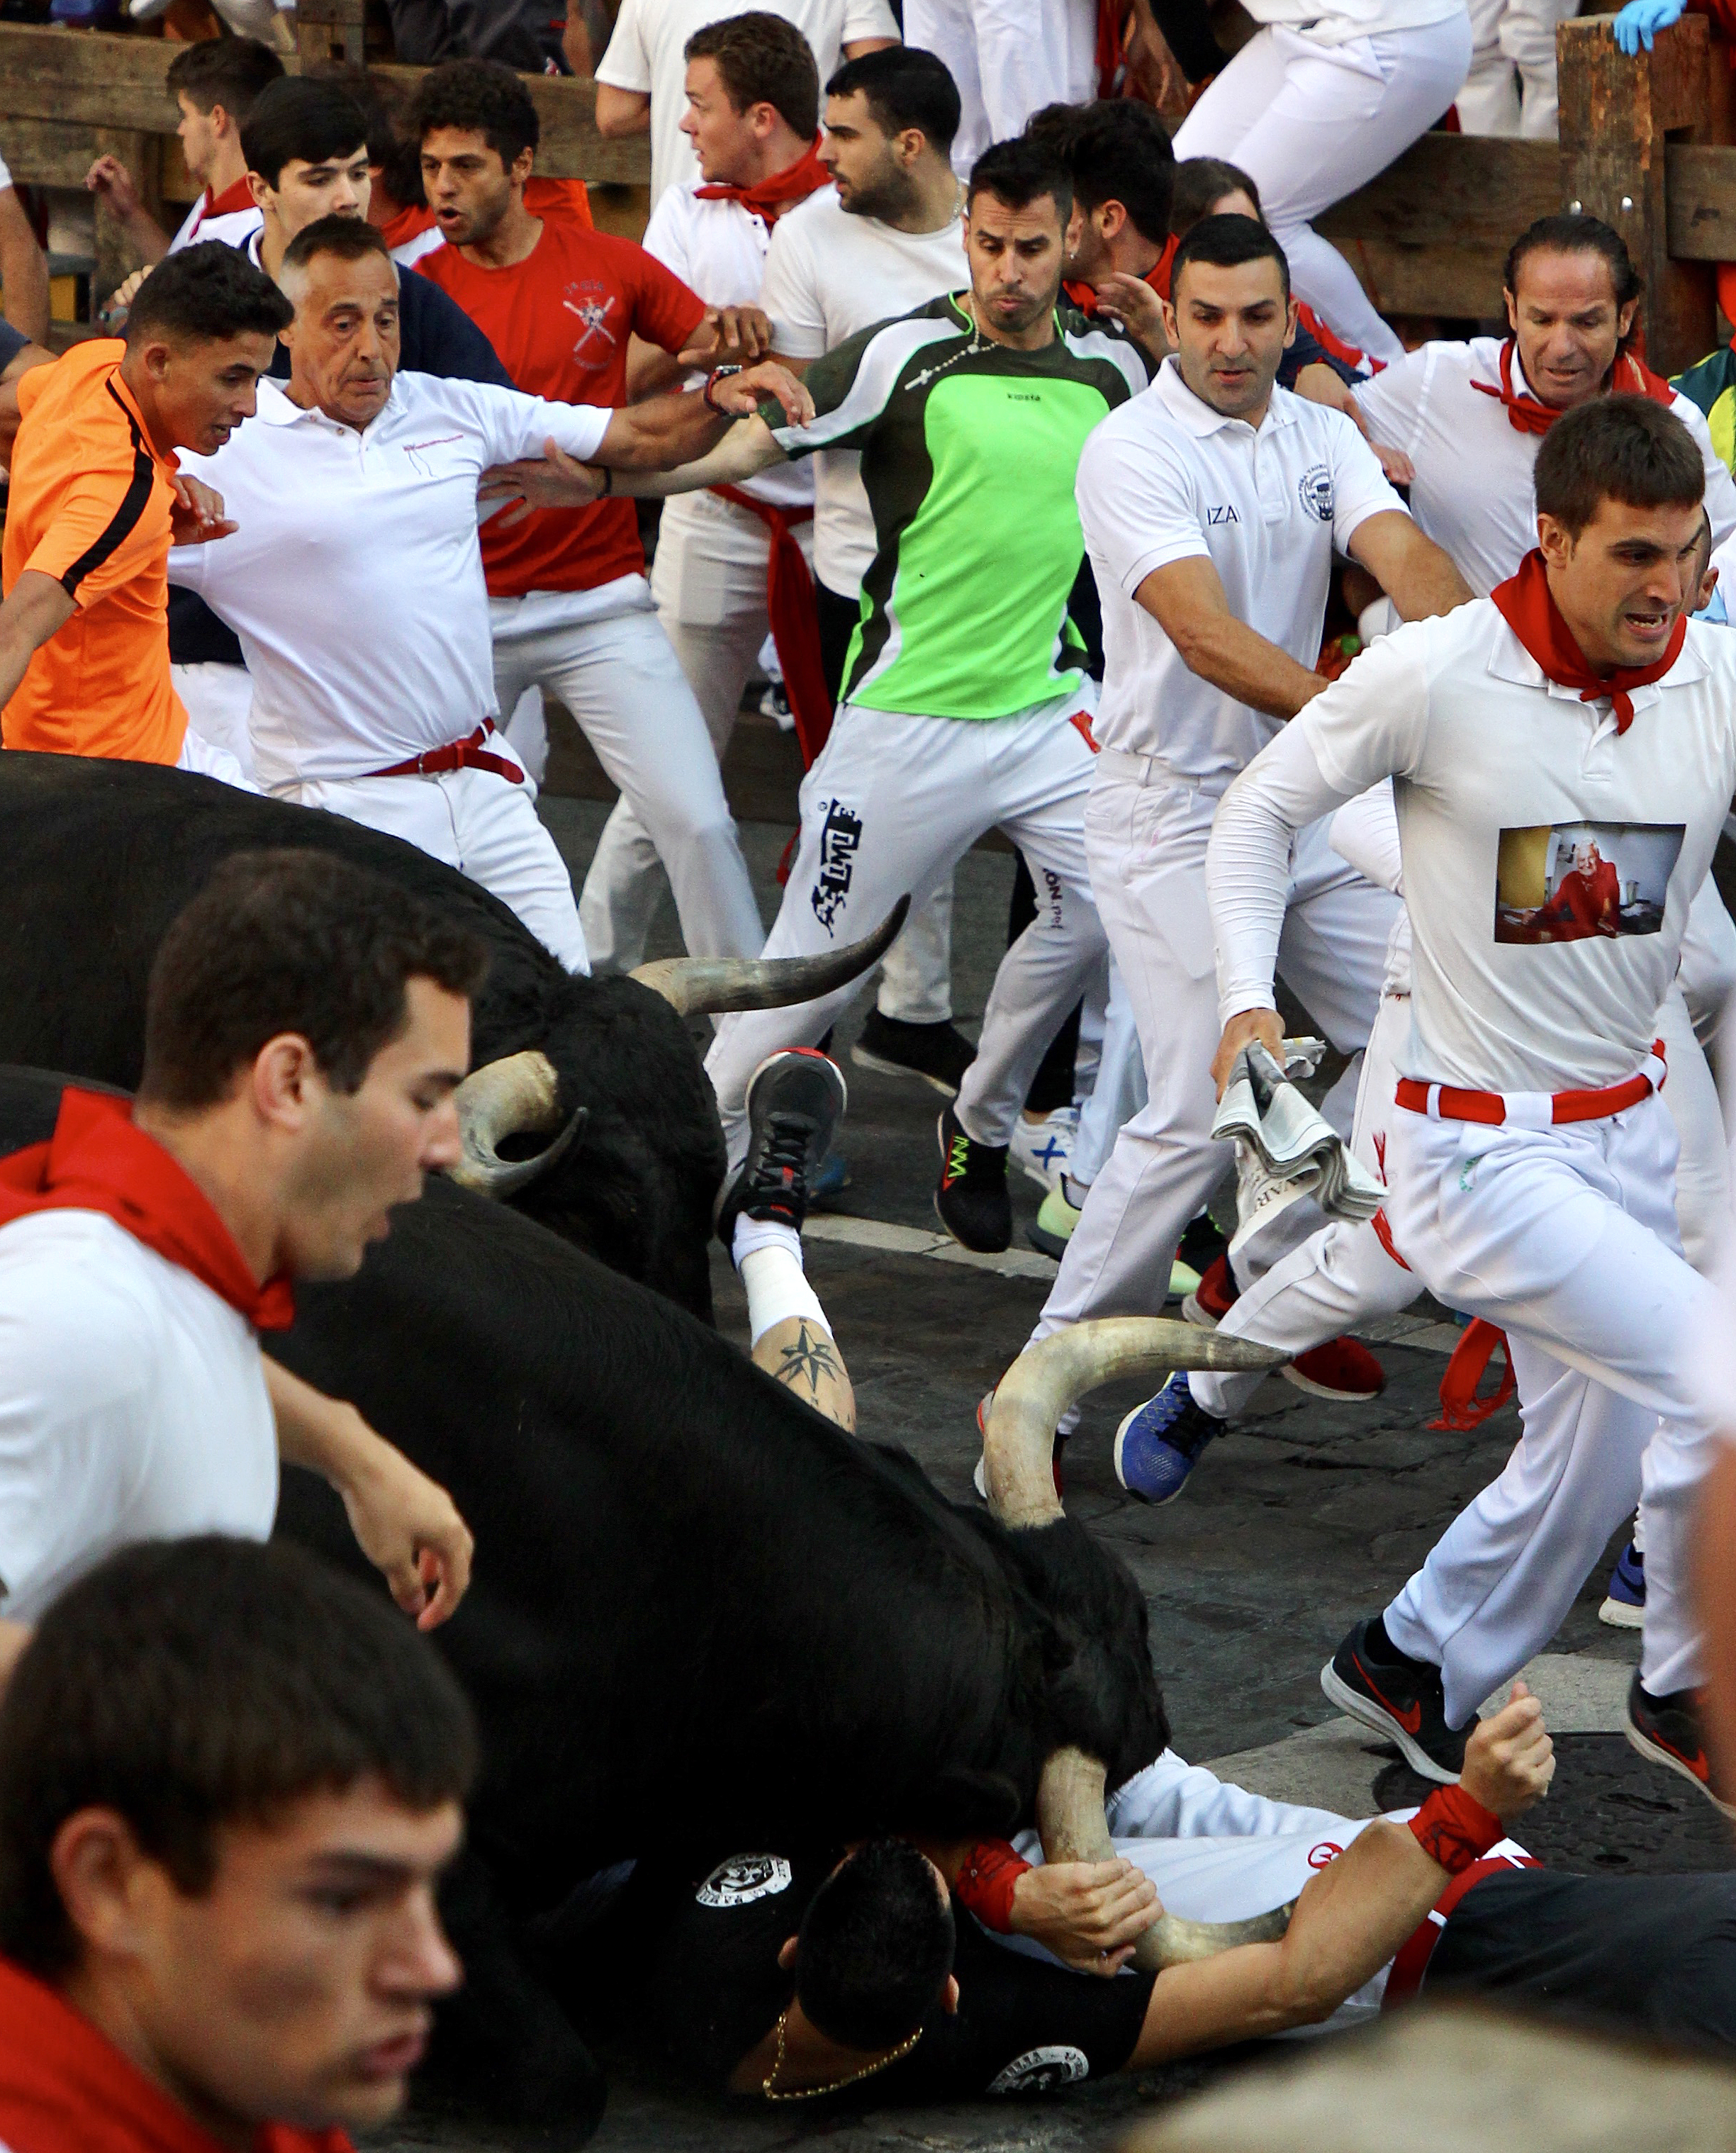 squire-running-with-bulls-washpo-submission.jpg